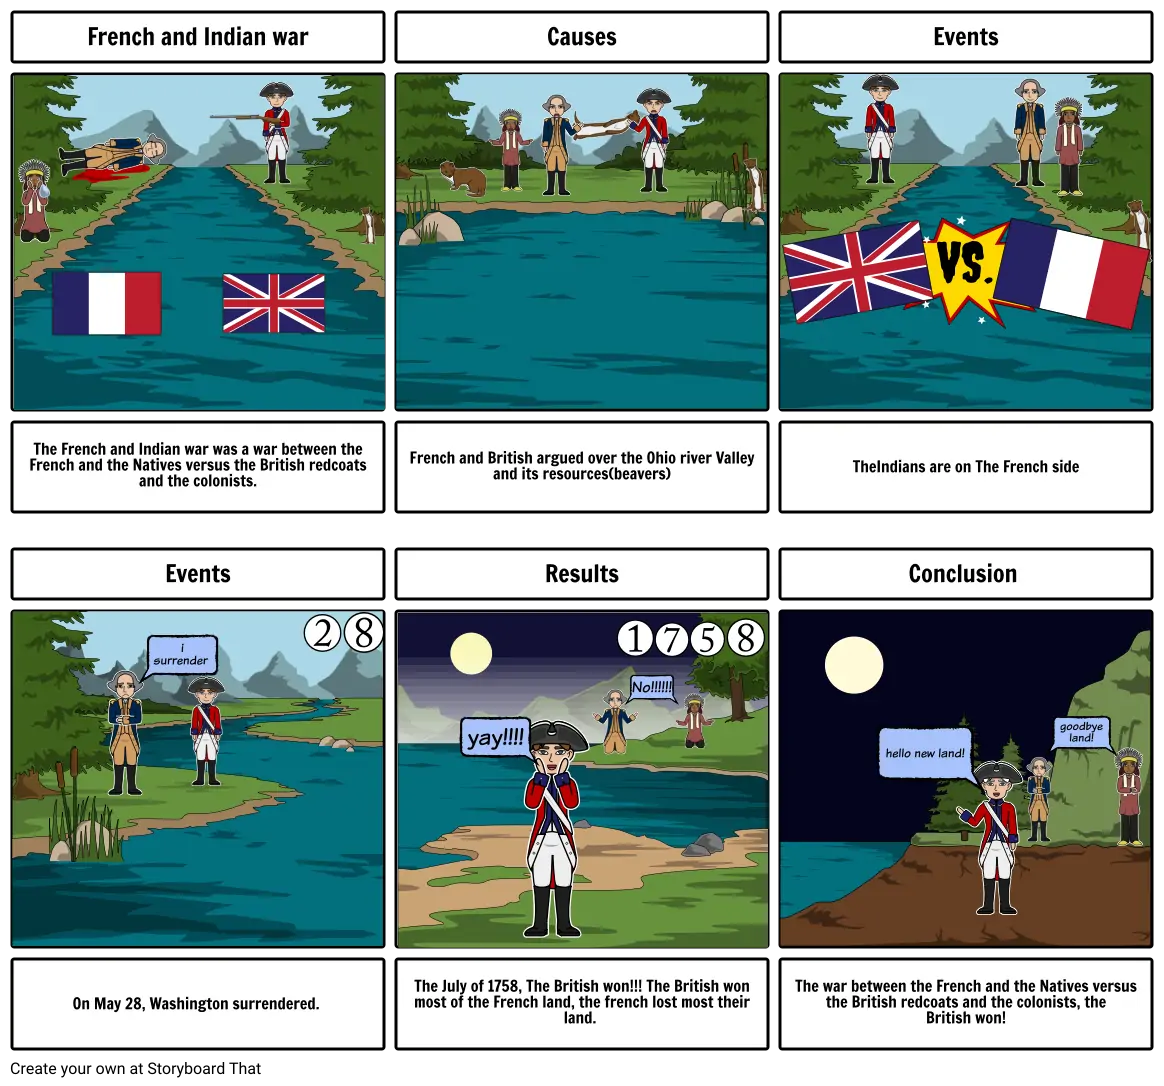 The french and Indian war